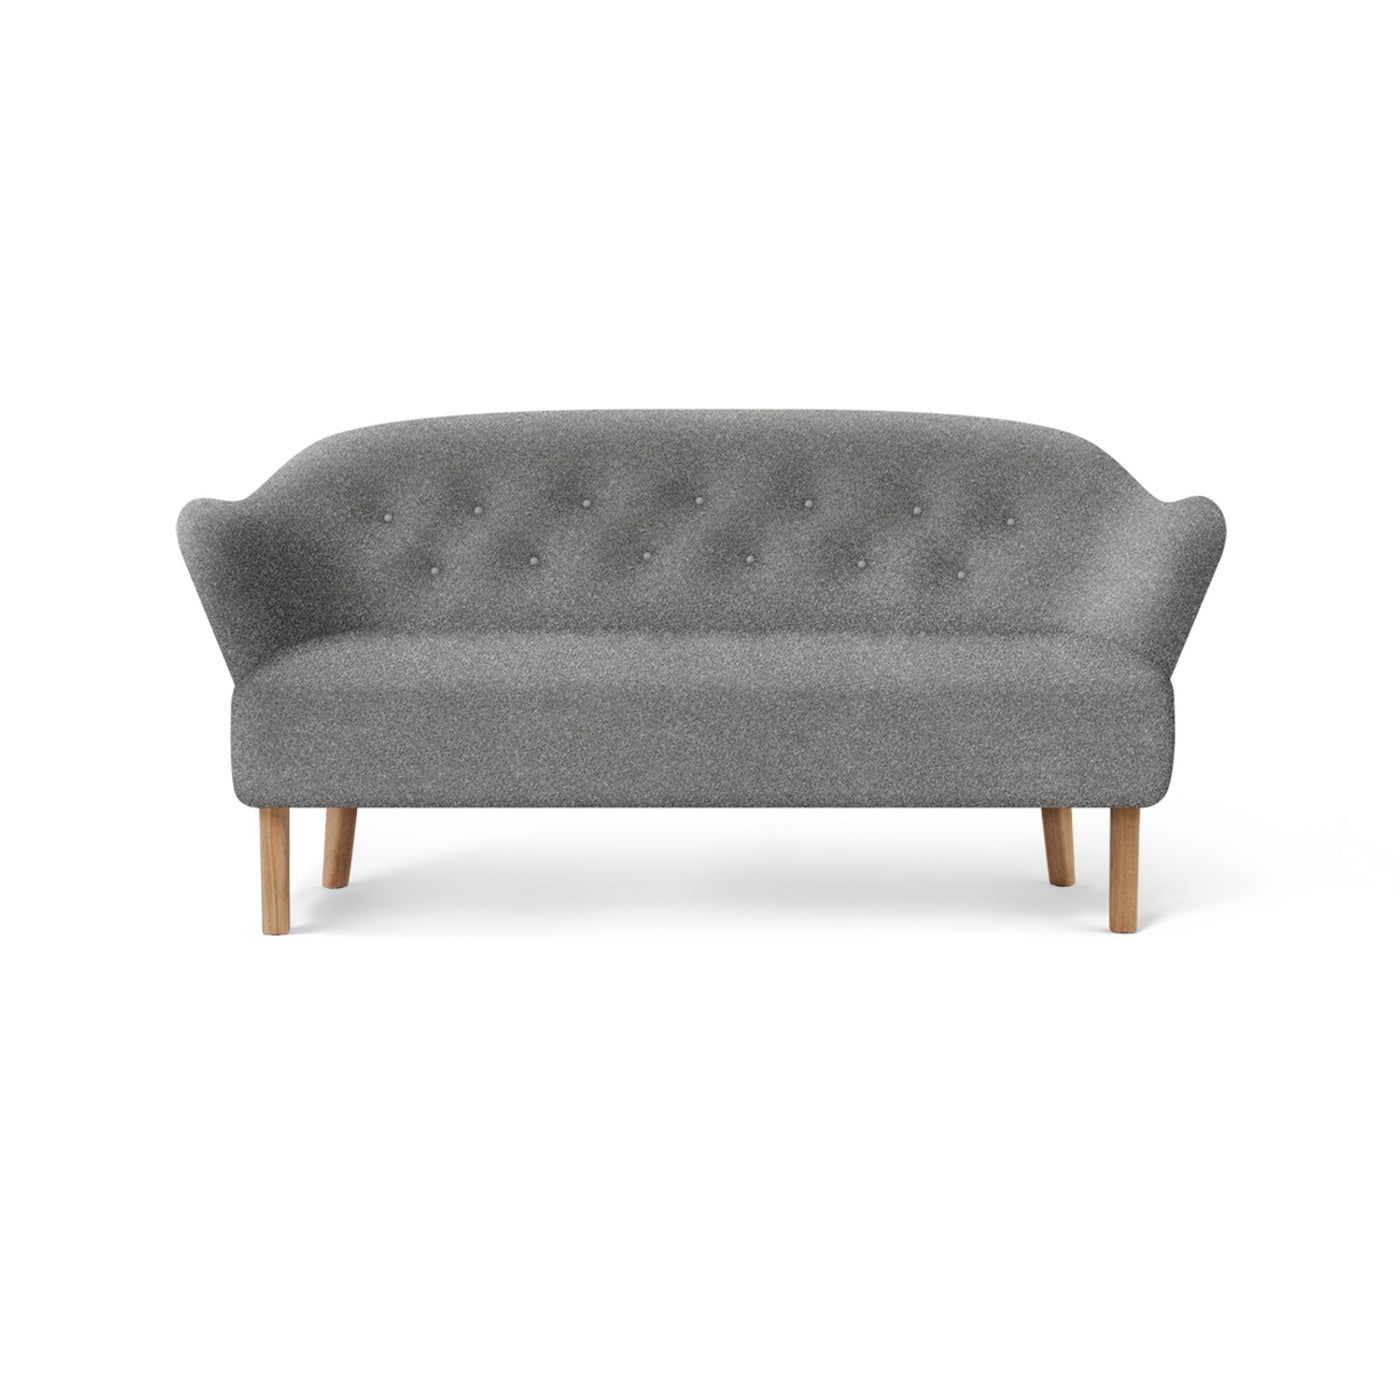 By Lassen Ingeborg sofa with natural oak legs. Made to order from someday designs. #colour_hallingdal-130